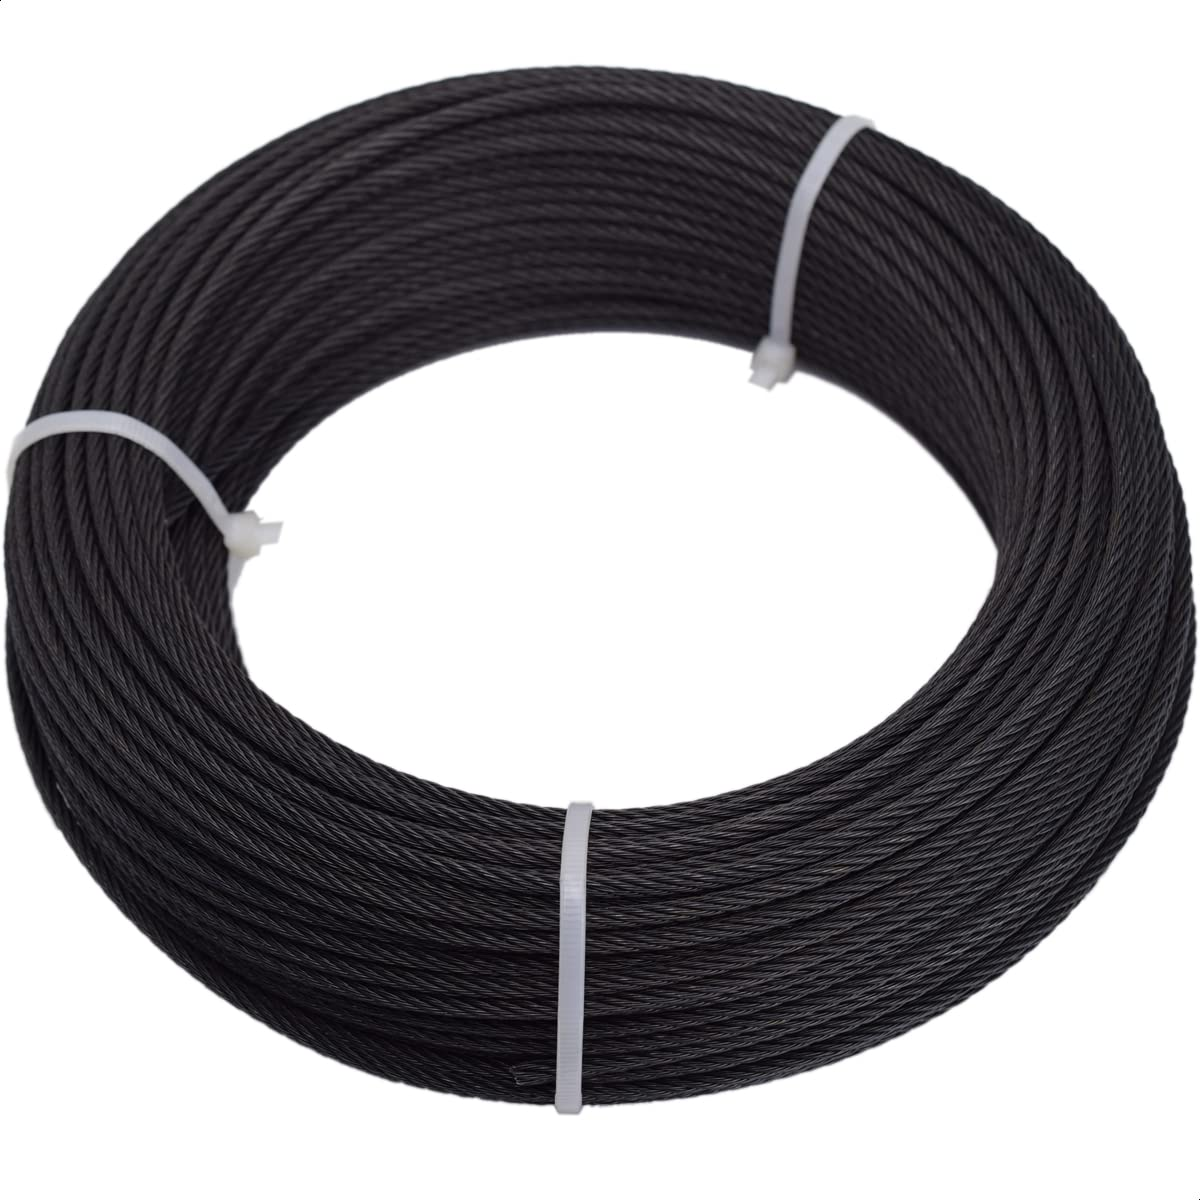 Black Stainless Steel Wire Riope